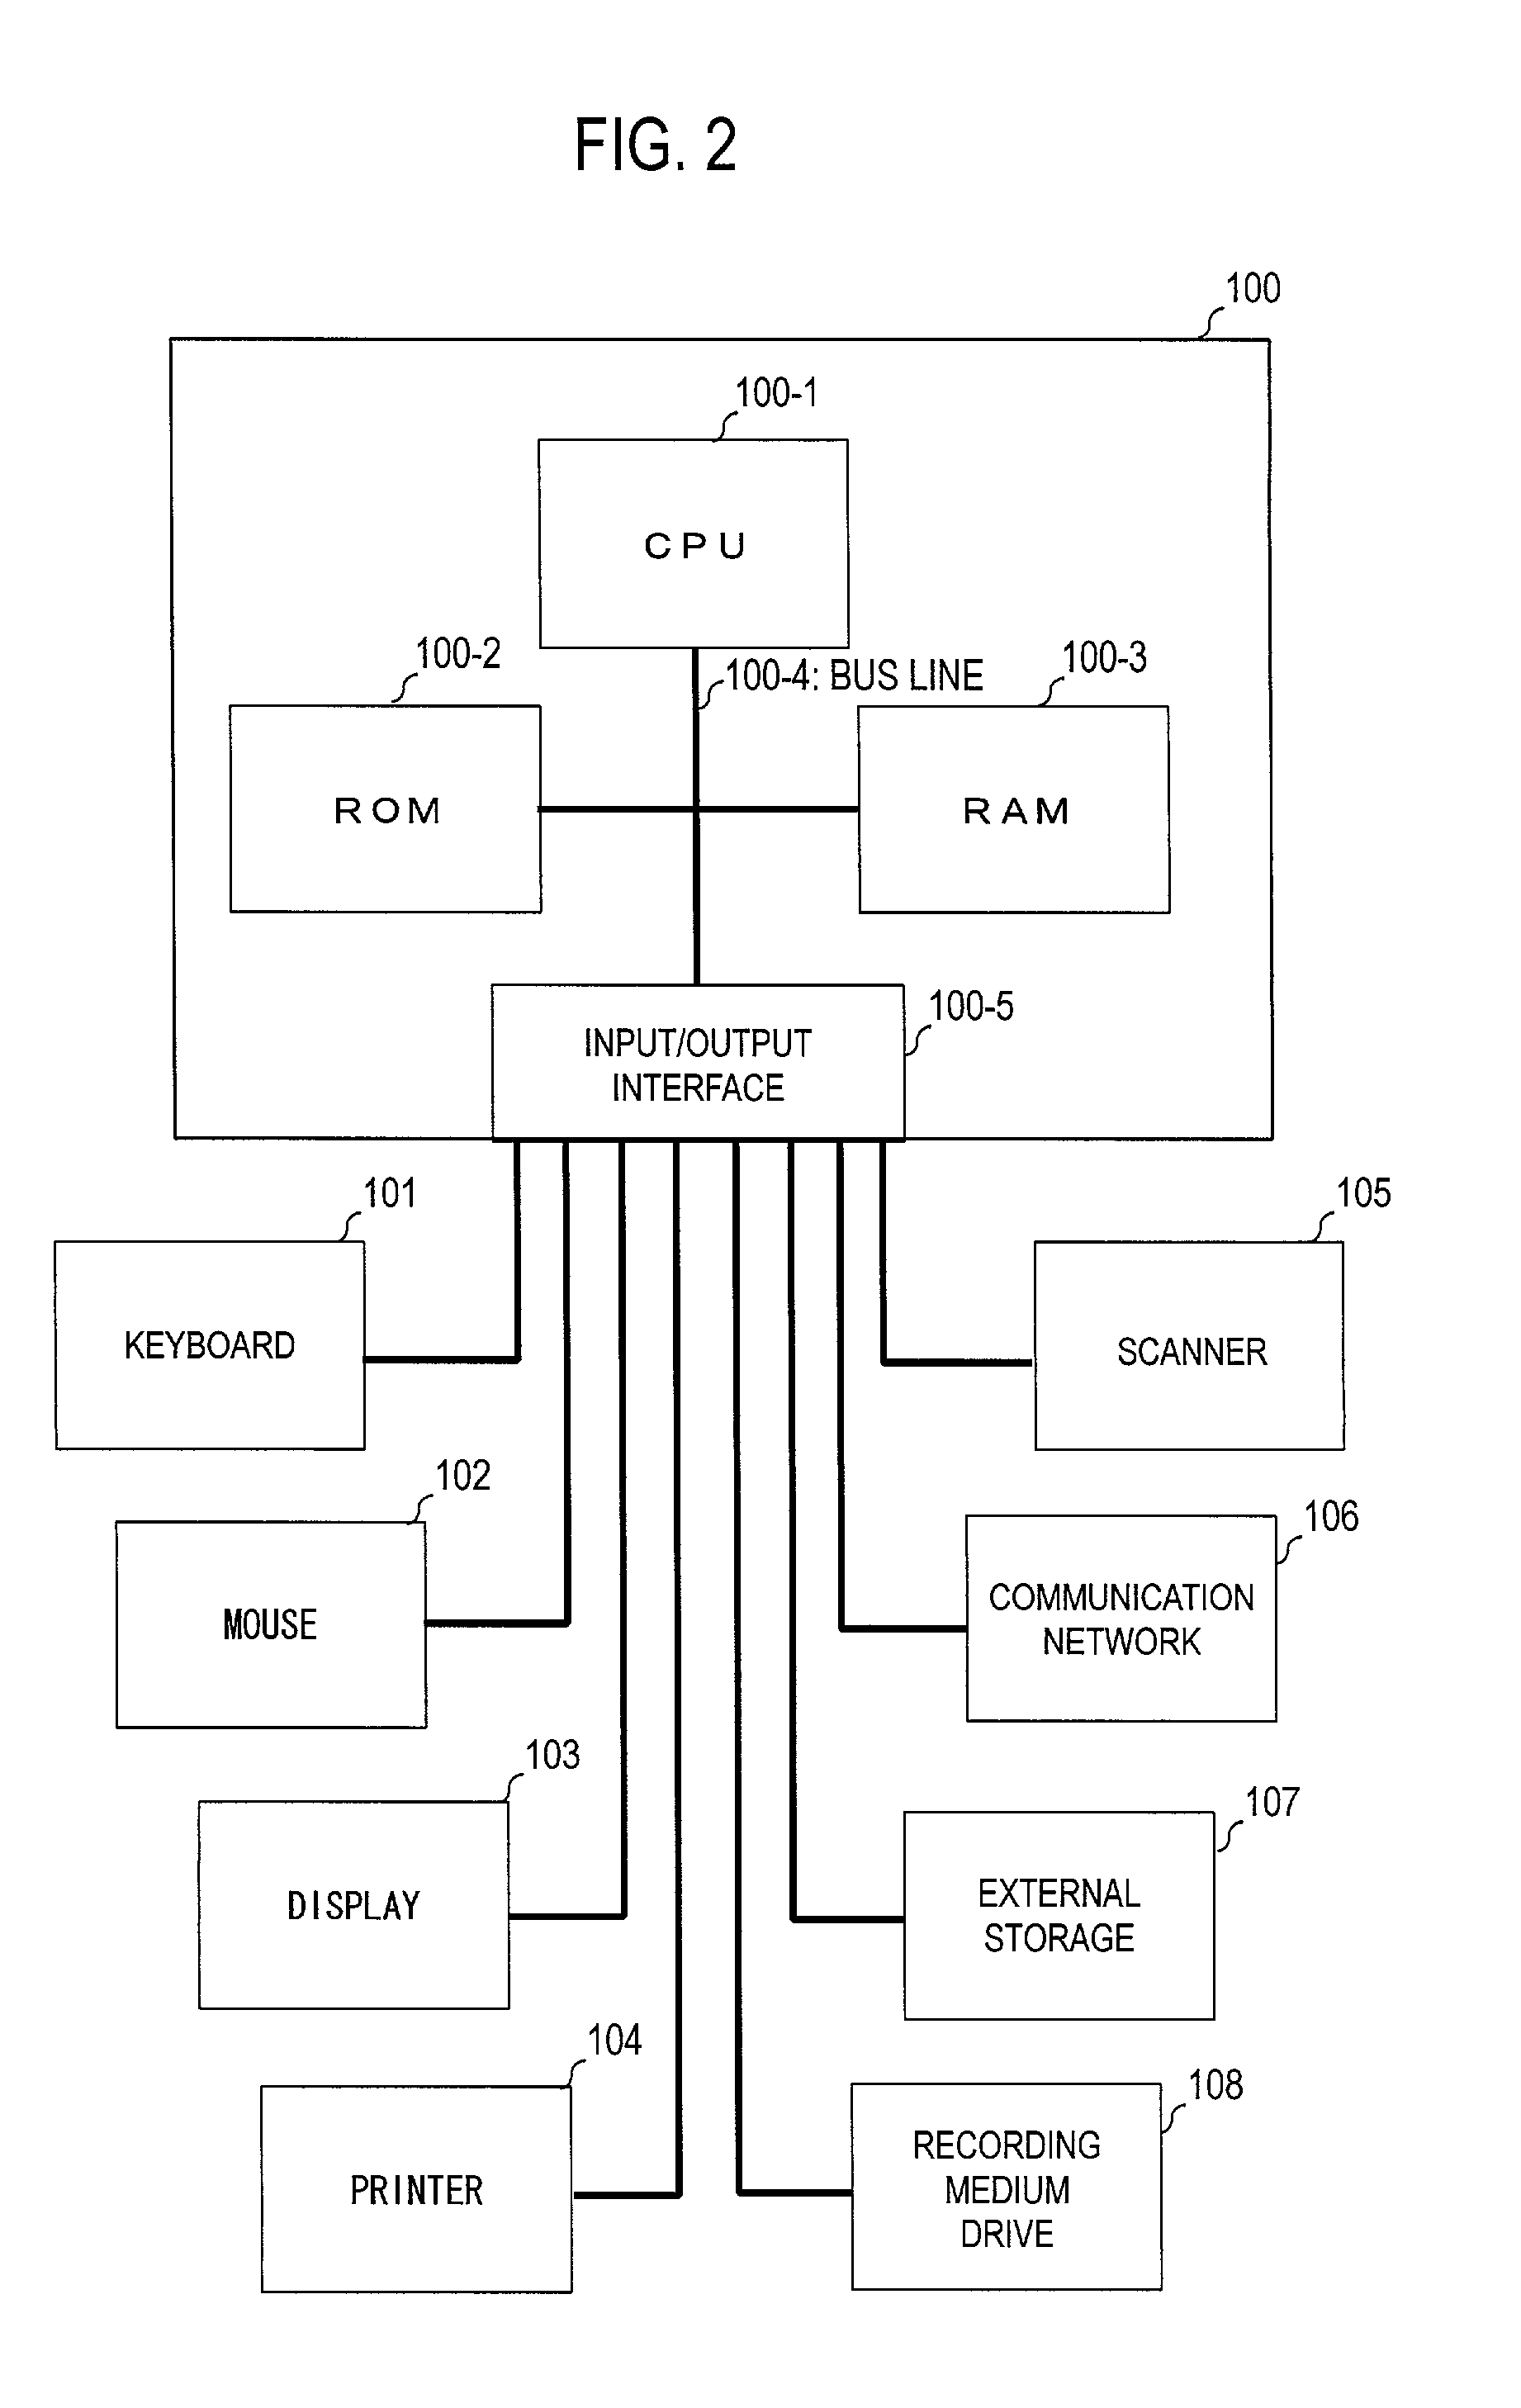 Pattern-center determination apparatus and method as well as medium on which pattern-center determination program is recorded, and pattern-orientation determination apparatus and method as well as medium on which pattern-orientation determination program is recorded, as well as pattern alignment apparatus and pattern verification apparatus